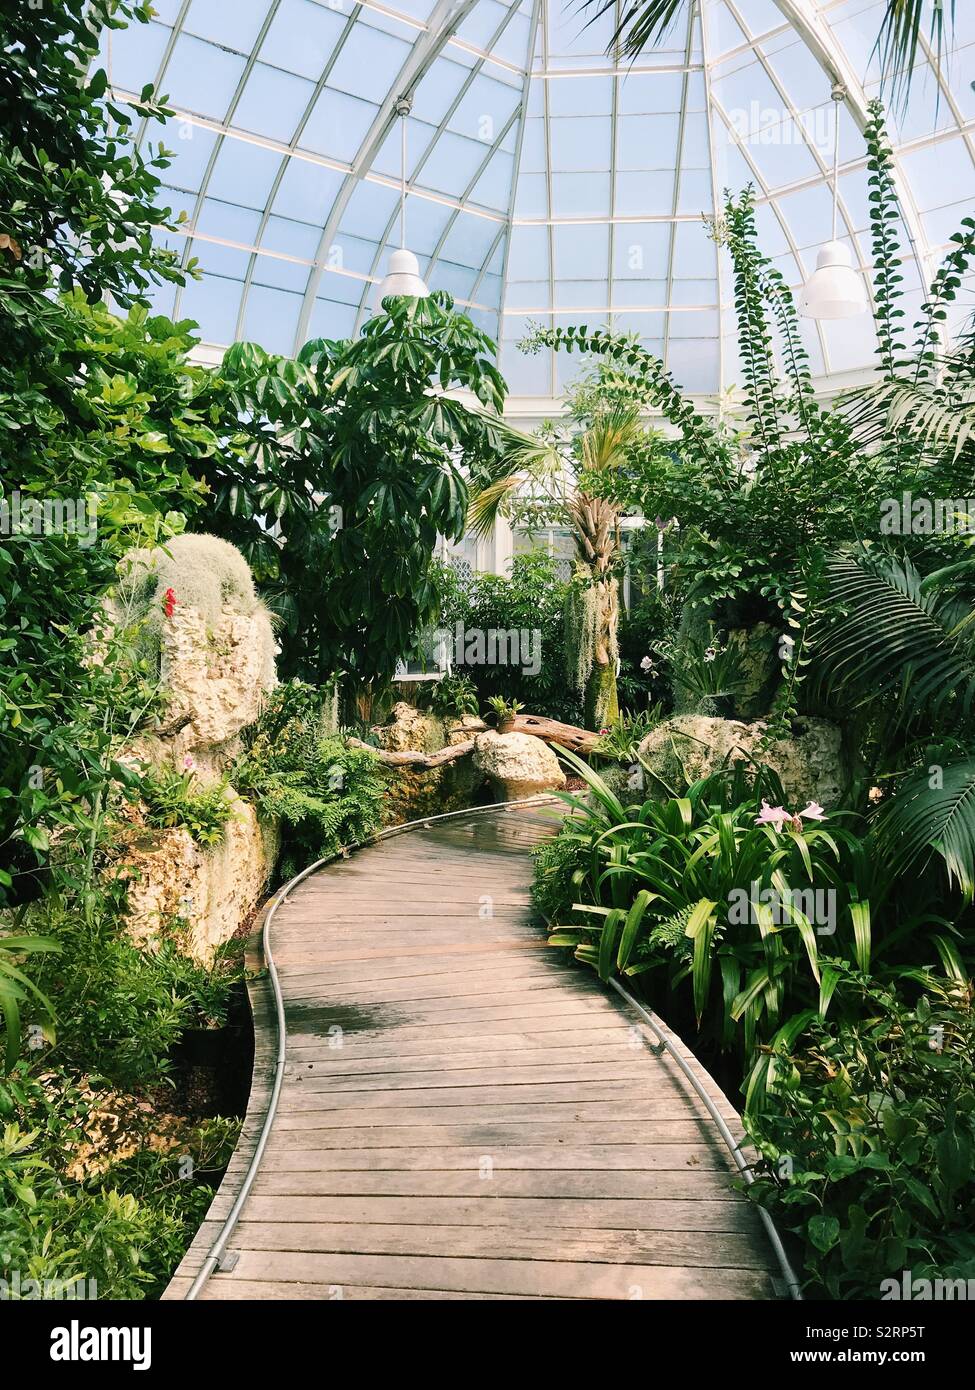 The conservatory and greenhouses known as the Orchid Range at Duke Farms in Hillsborough, New Jersey, USA. Stock Photo